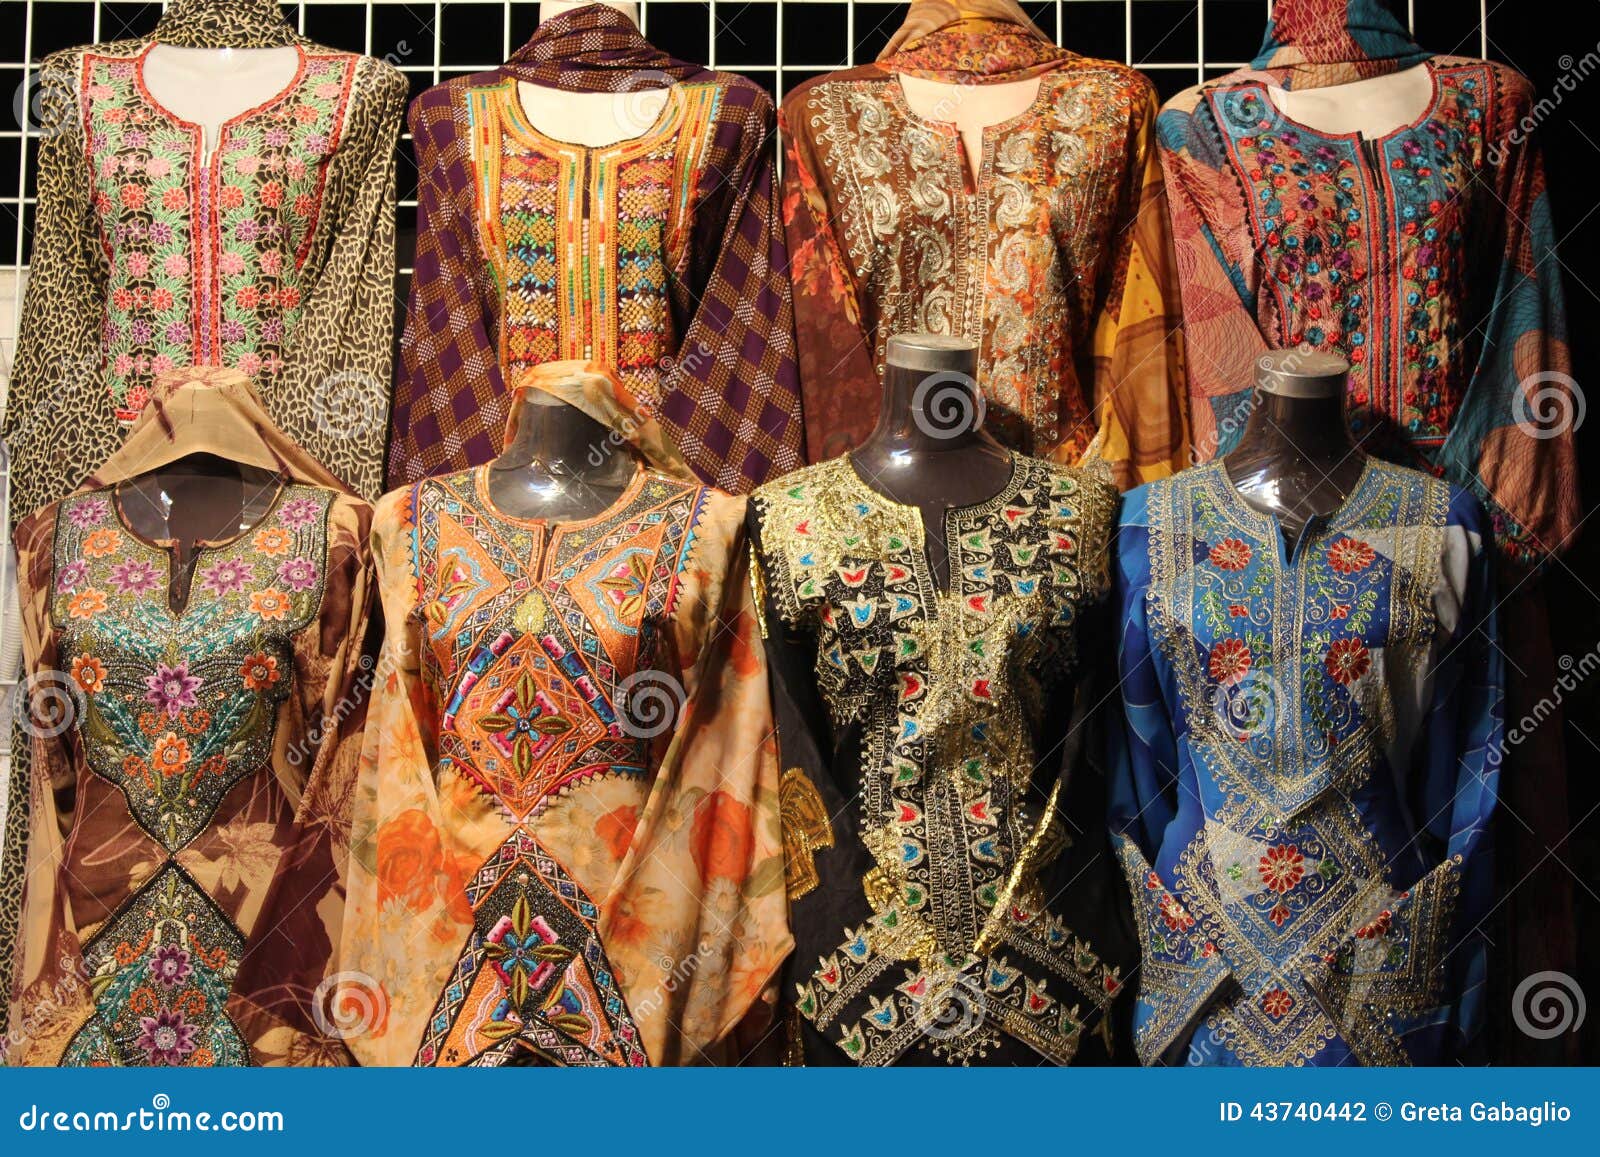 woman-traditional-omani-dress-colorful-typical-women-dresses-showed-shop-muscat-oman-capital-43740442.jpg